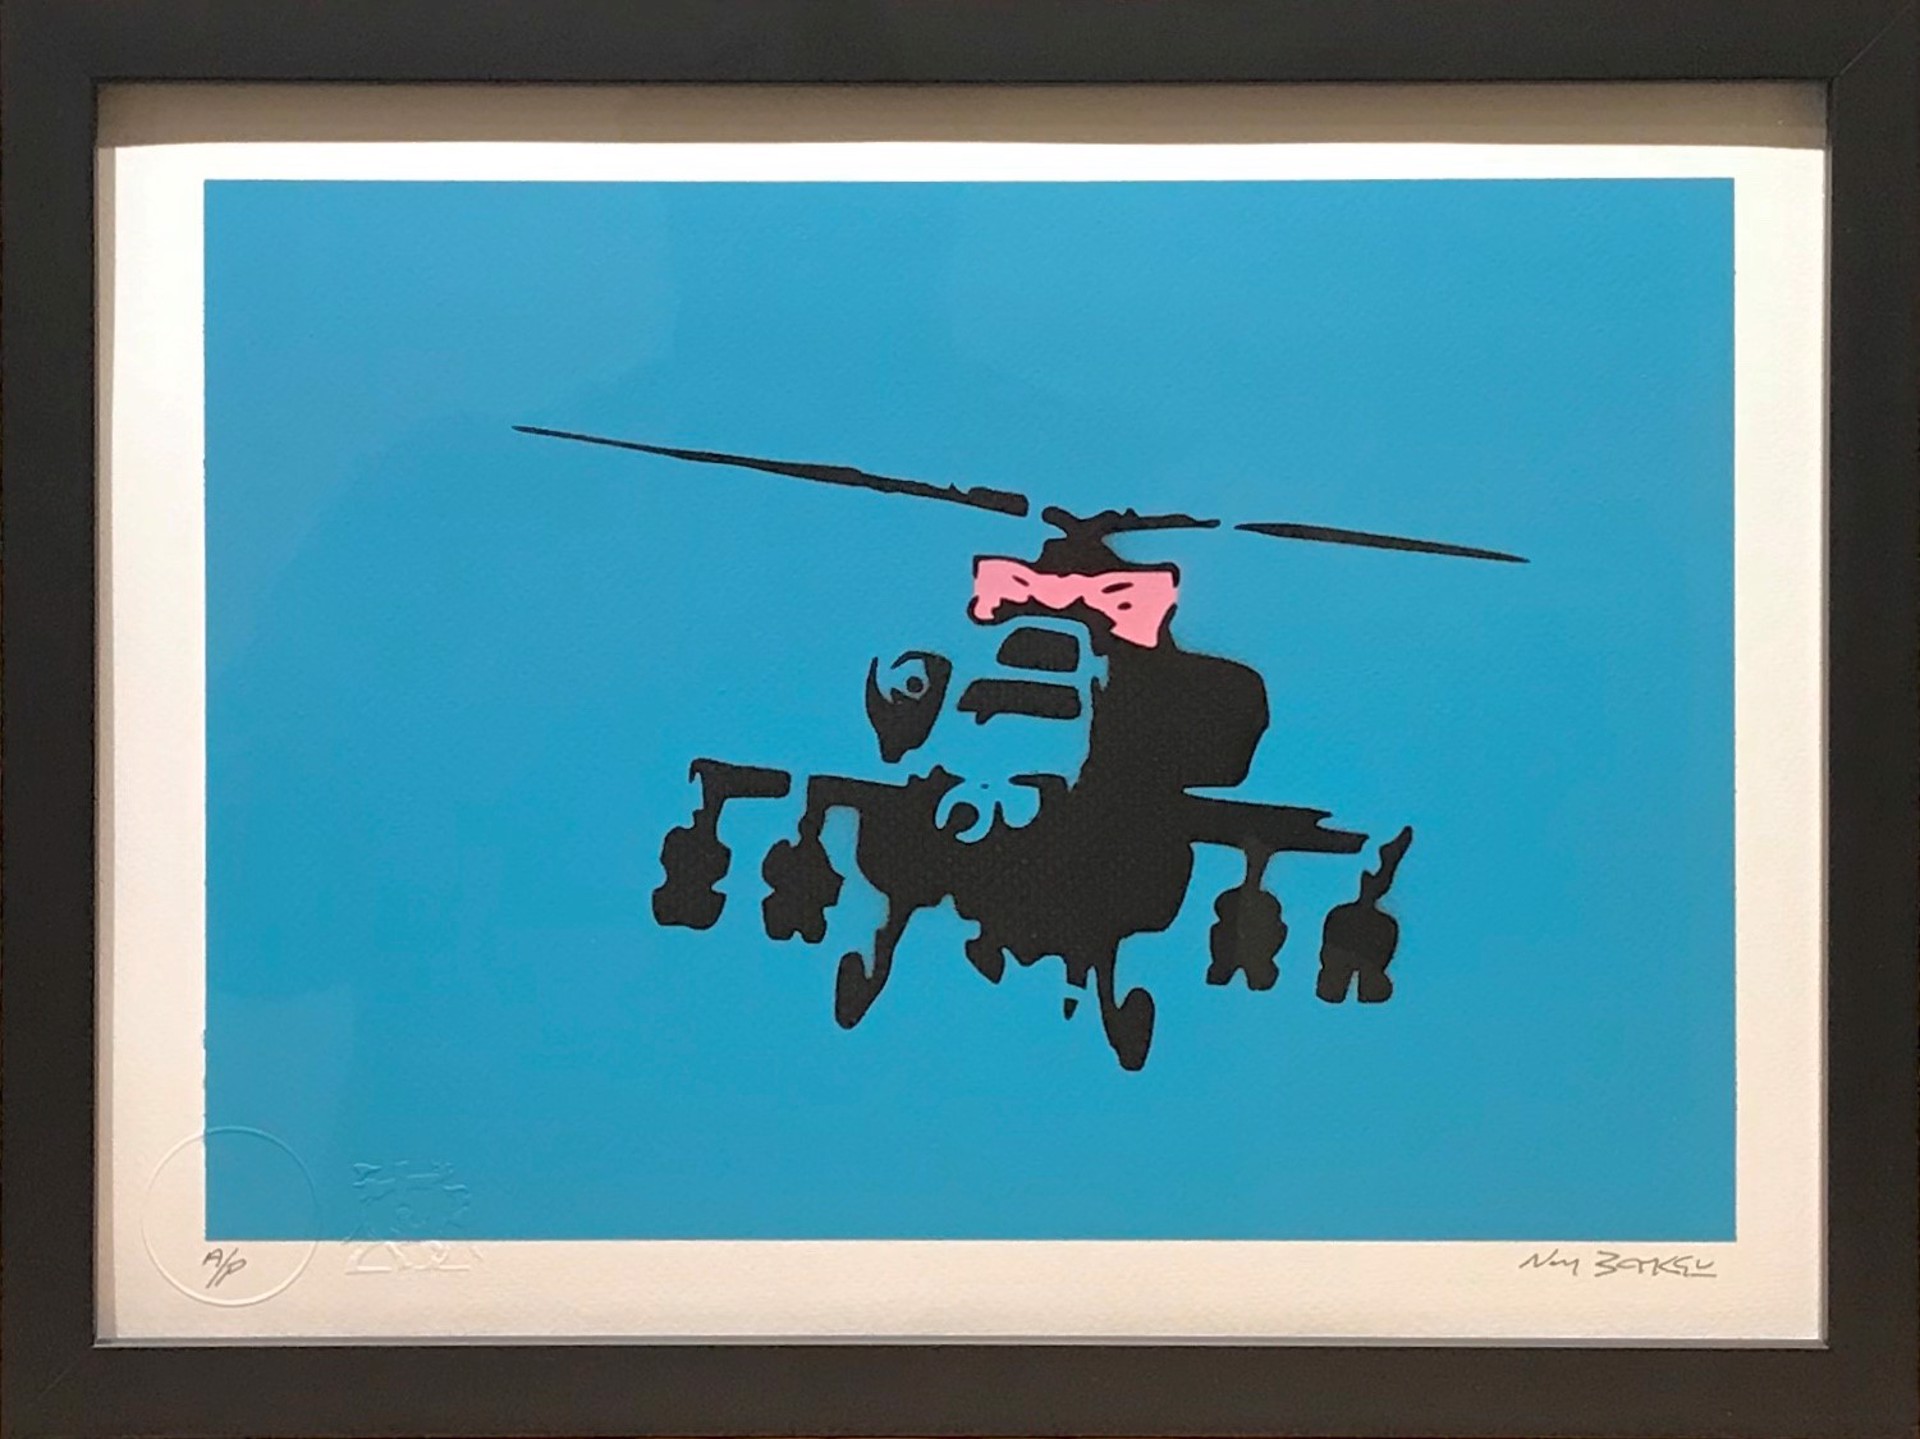 Apache Helicopter (Blue) by Not Banksy